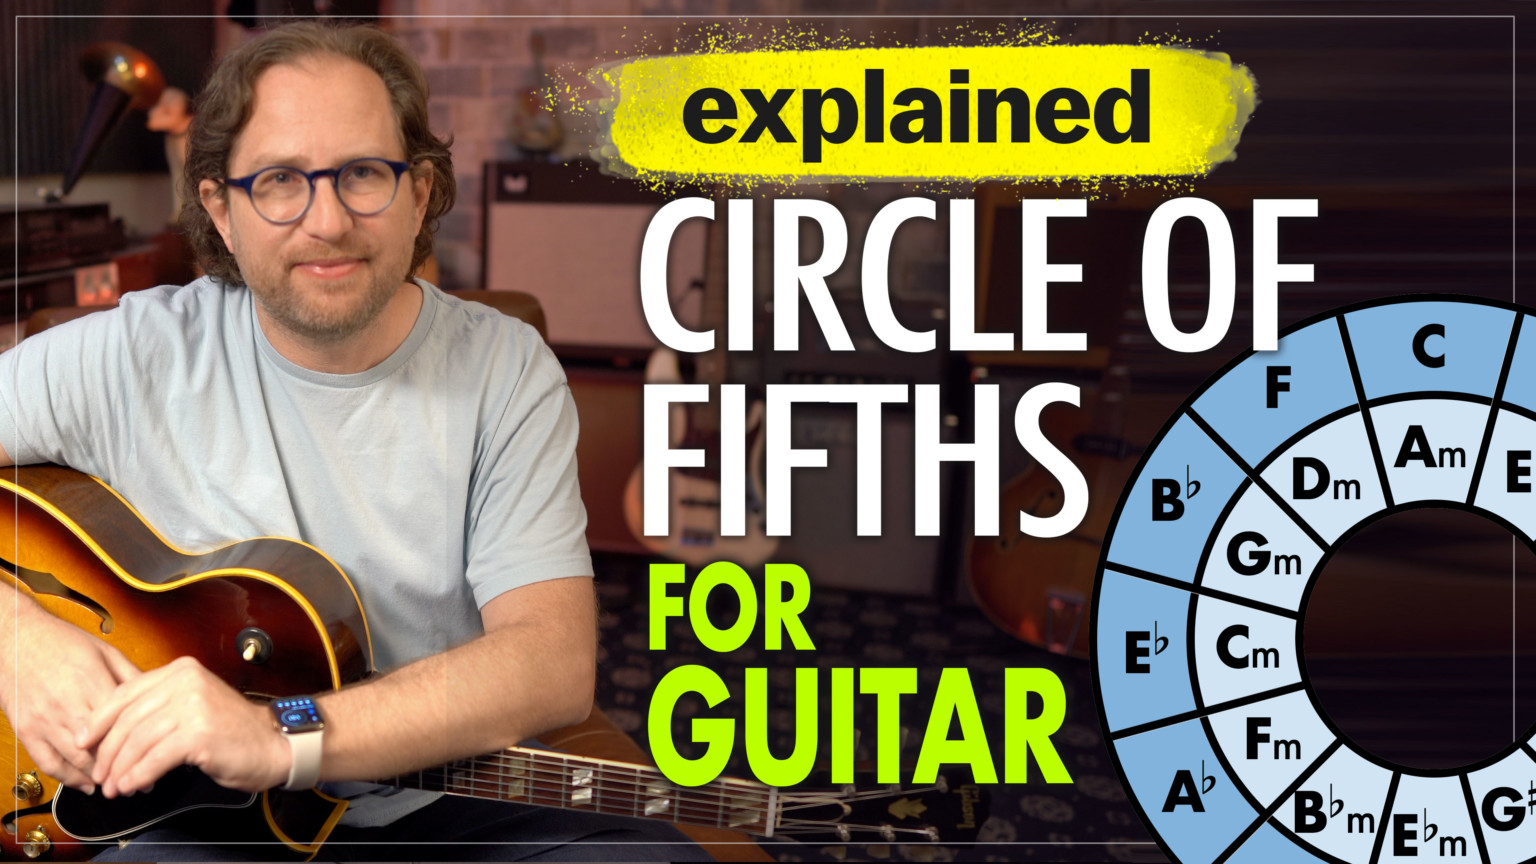 circle-of-fifths-guide-why-and-how-is-it-used-musicnotes-now-vrogue